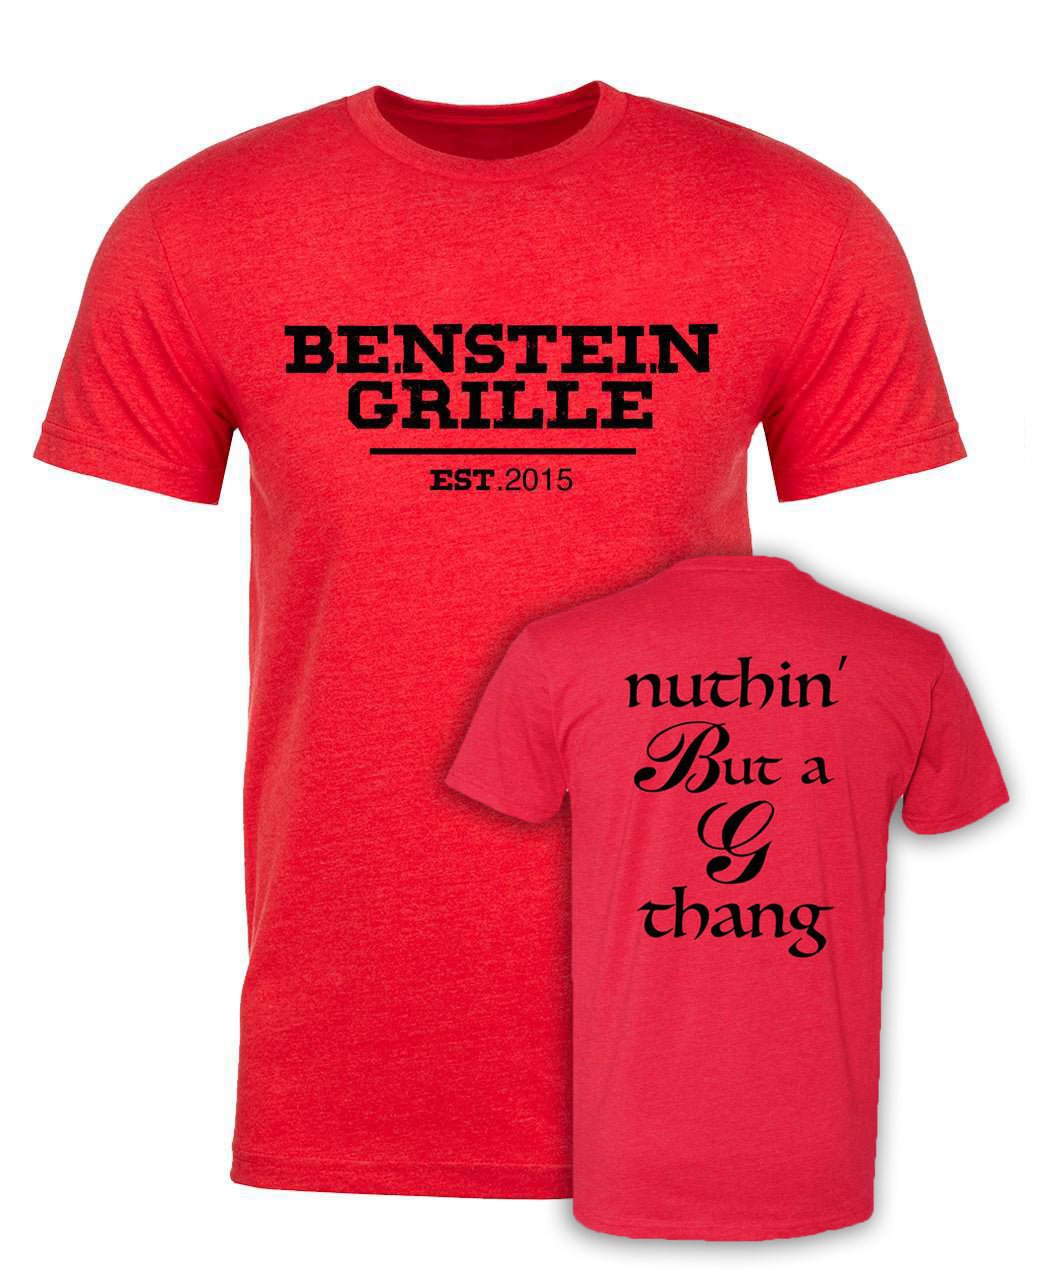 Benstein Grille "Nuthin` But a G Thang" Soft Cozy Shirt EST . W/Nuthin` Design - Mato & Hash